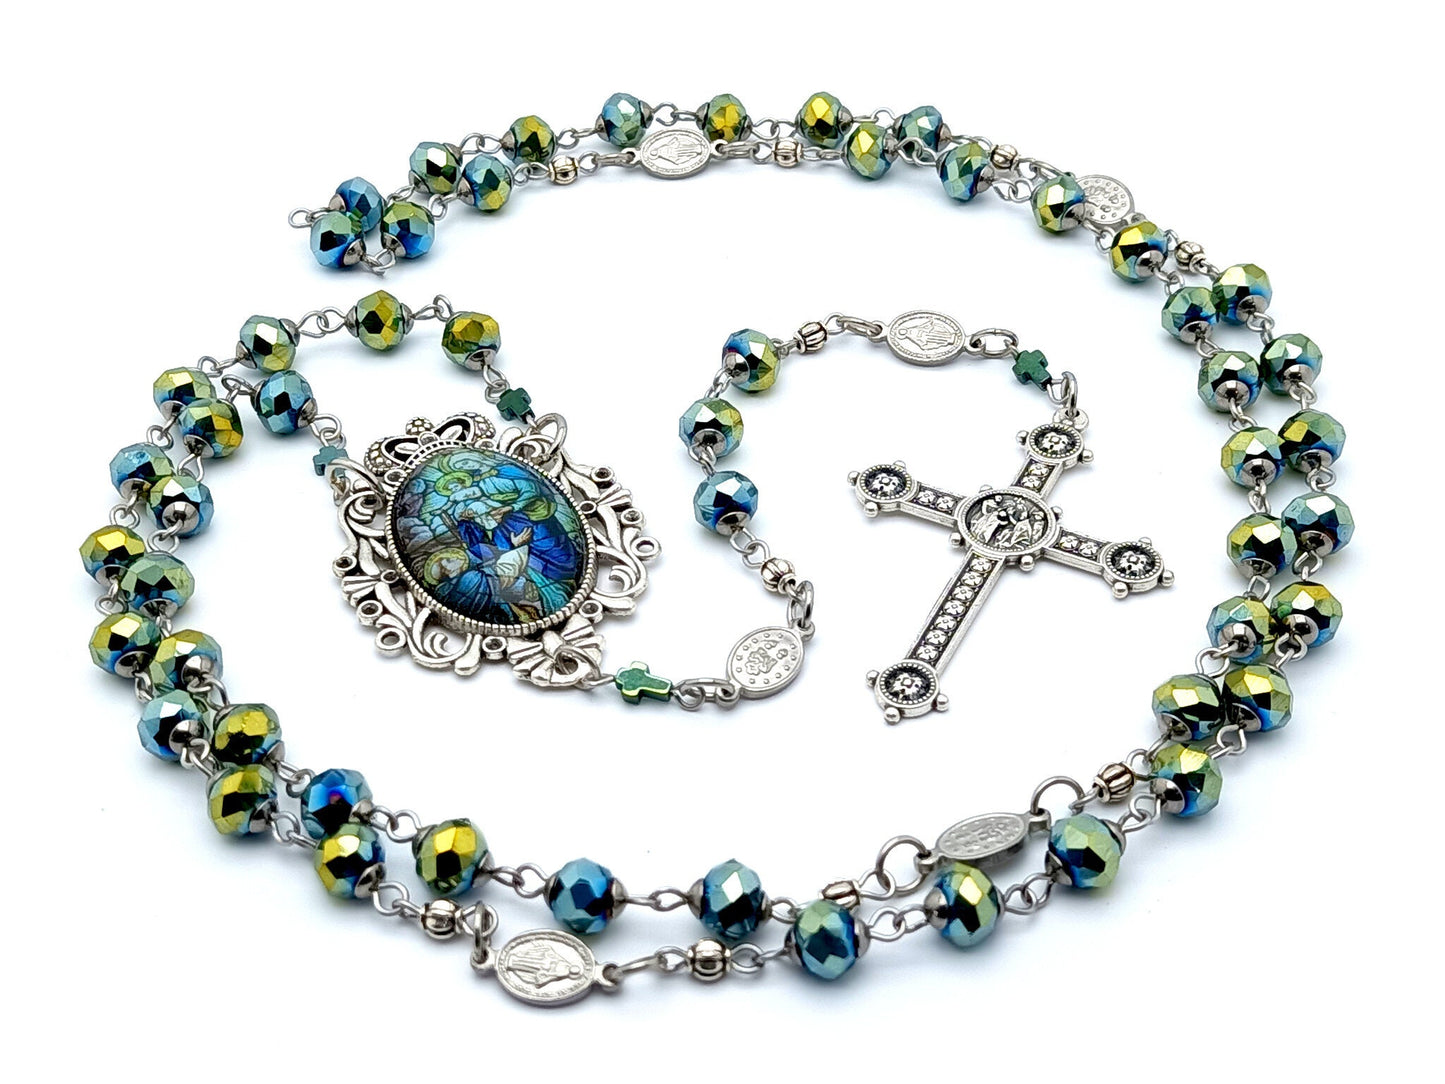 Our Lady of Mount Carmel unique rosary beads with blue green glass and stainless steel Miraculous Medal beads, silver Papal crucifix and picture centre medal.